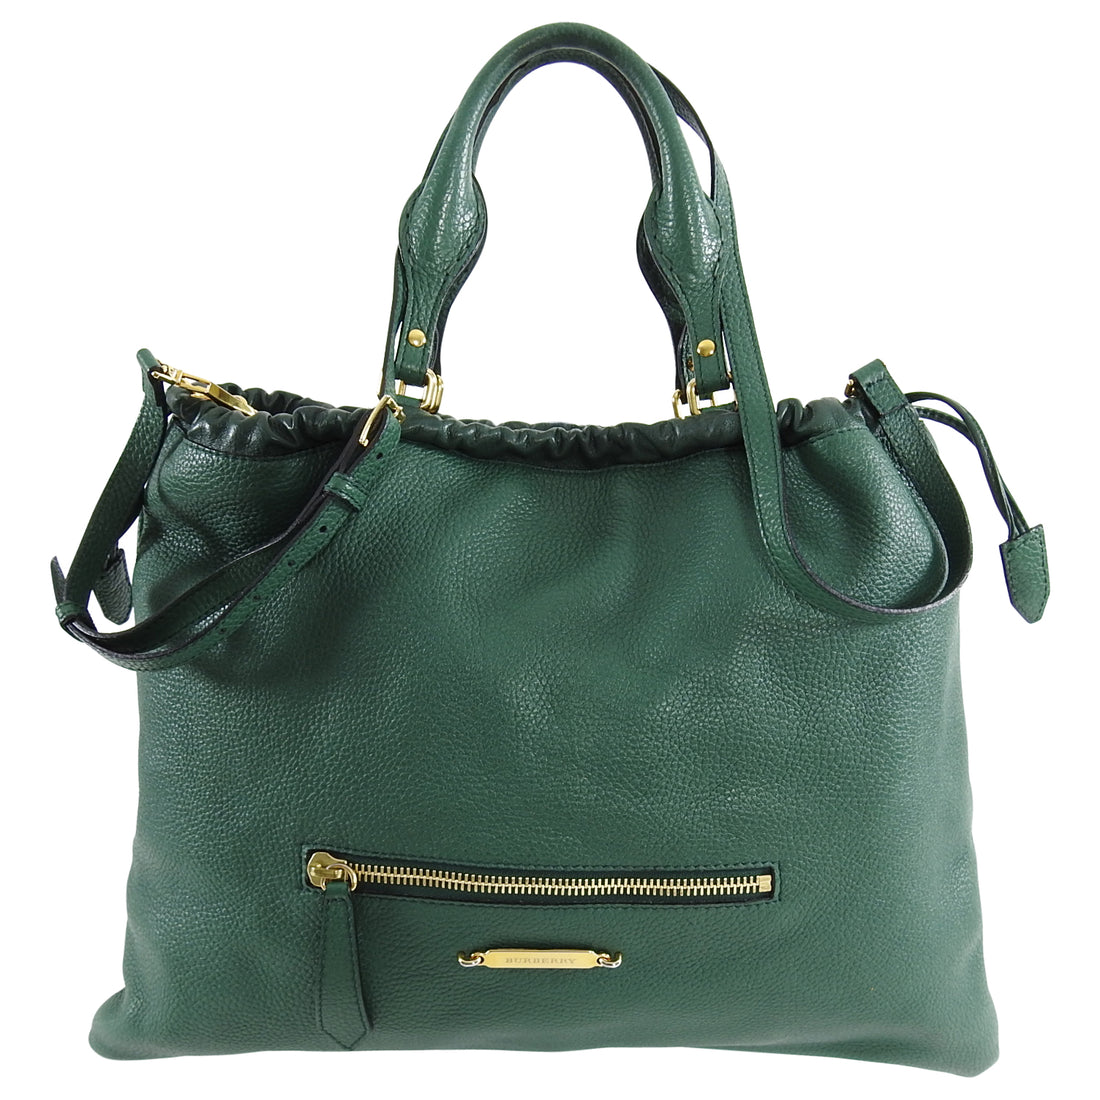 Burberry Green Large Leather Tote Bag with Shoulder Strap – I MISS YOU ...